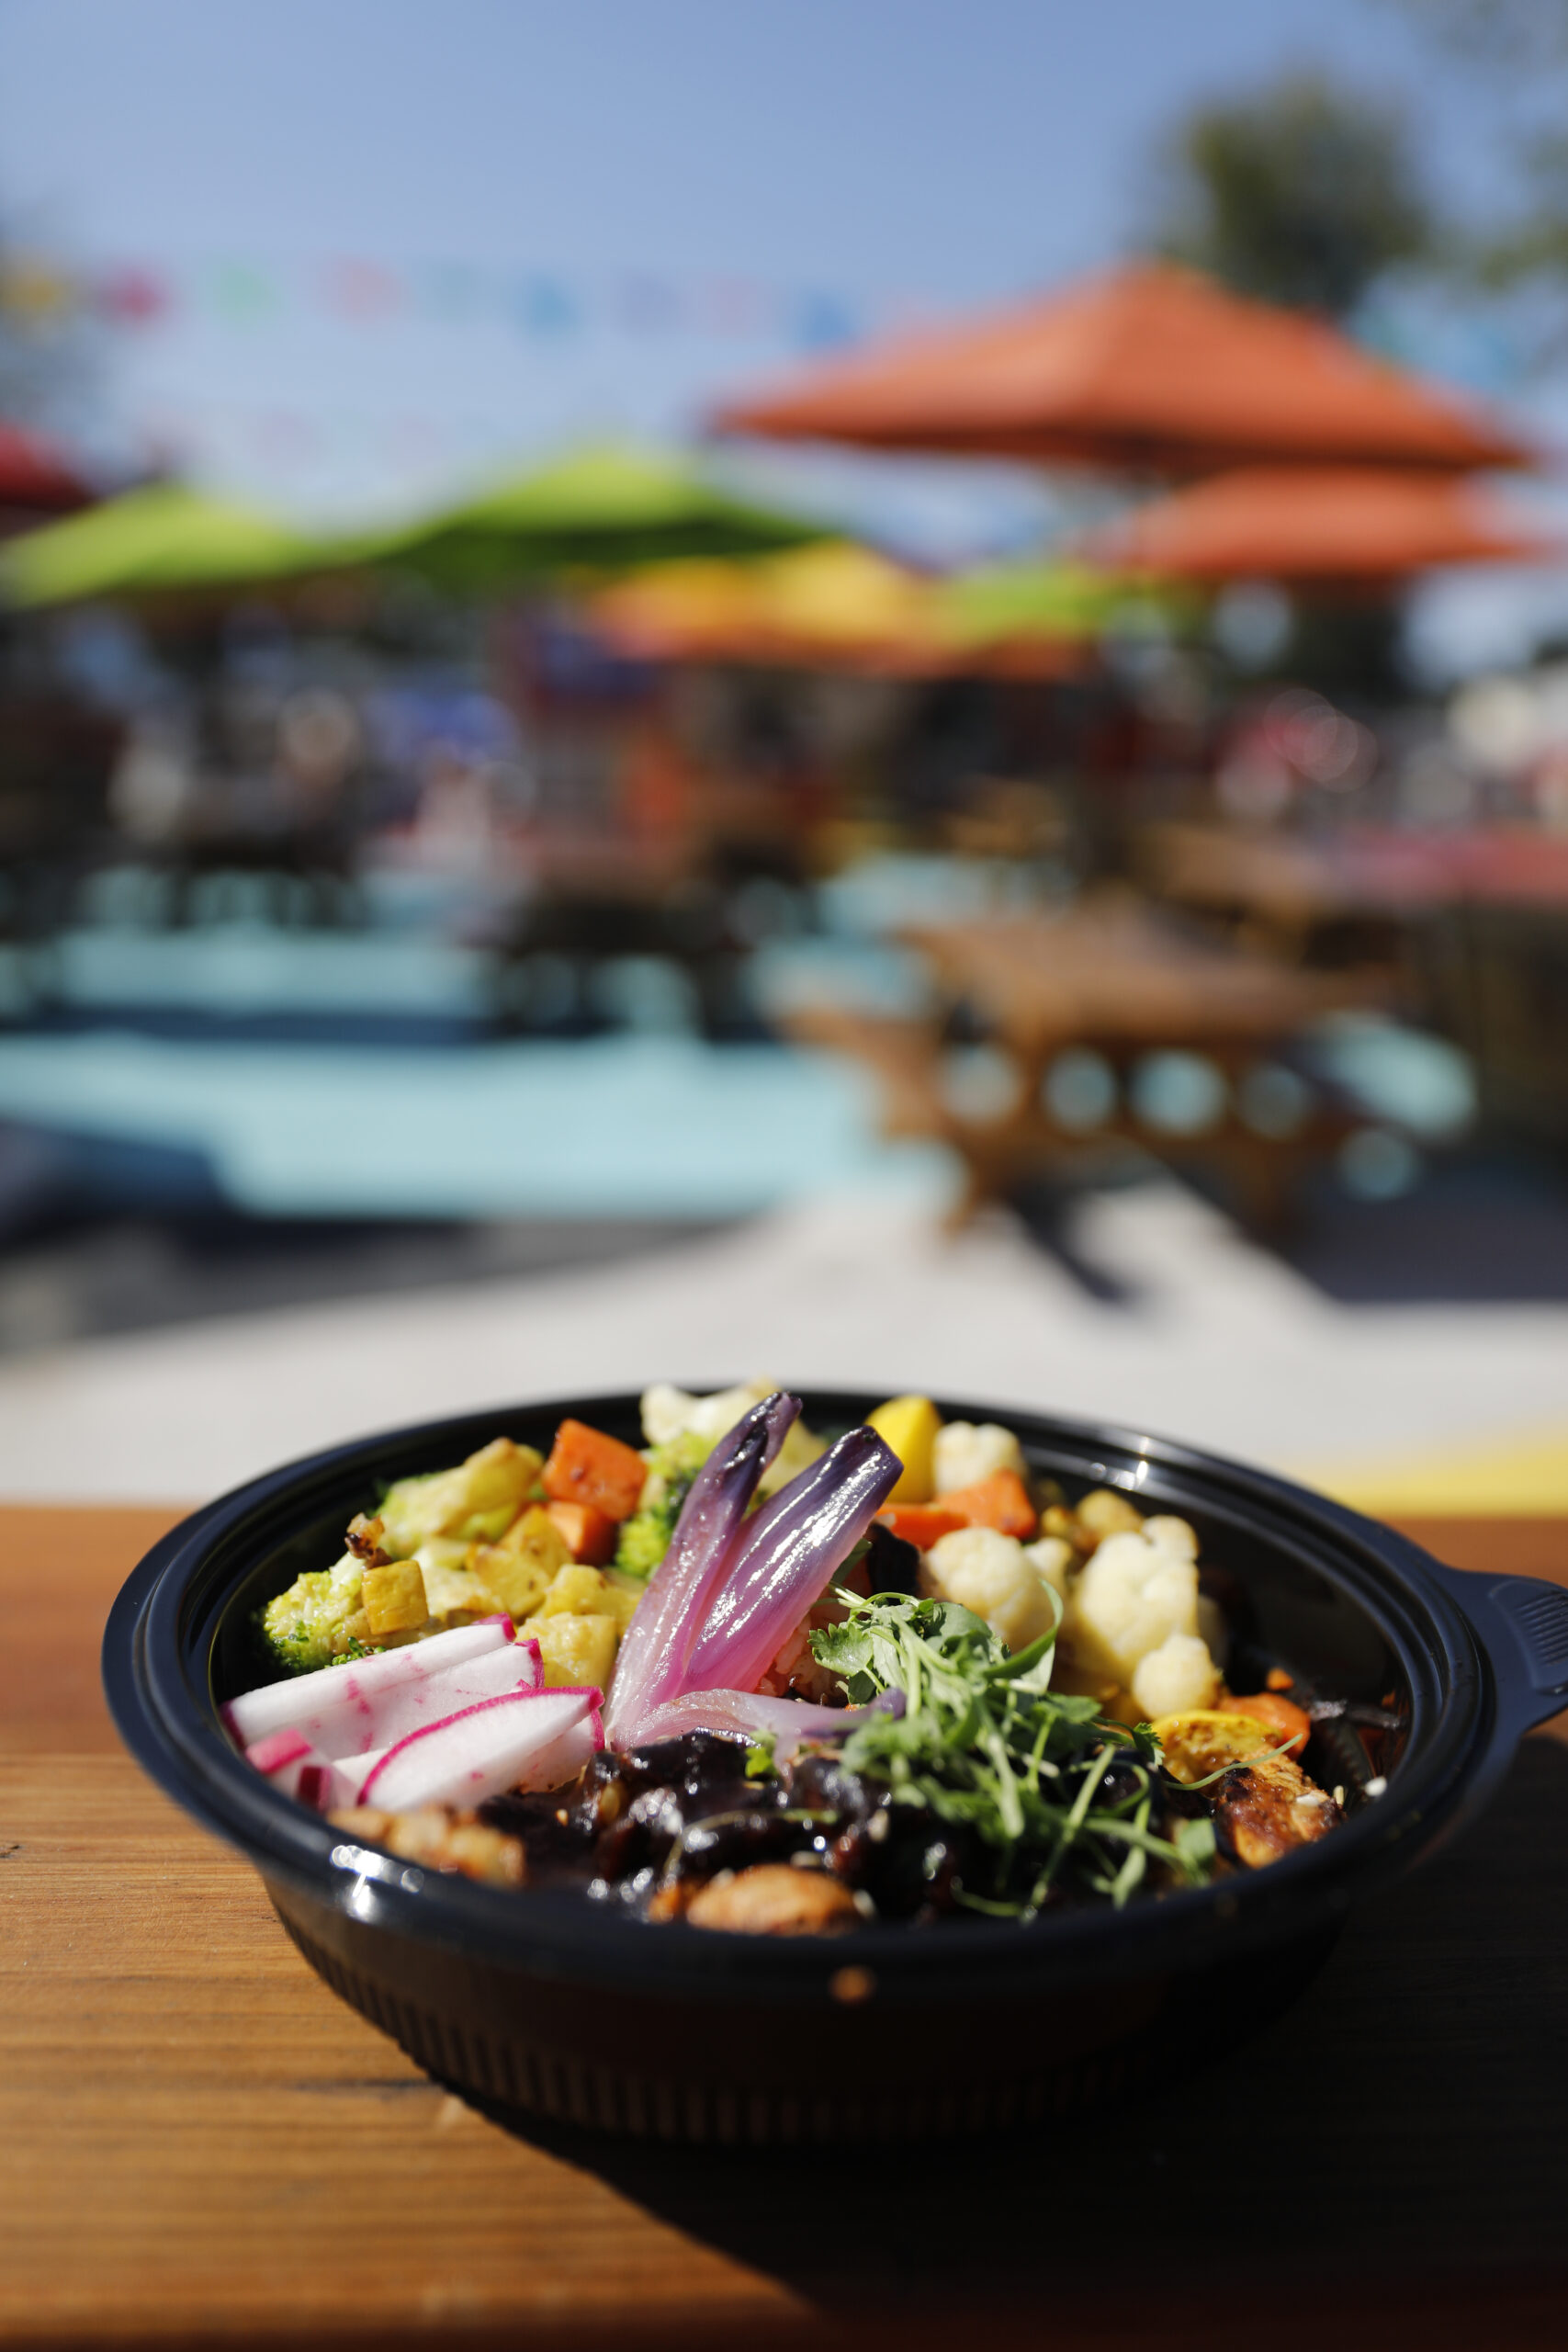 Chicken, vegetables and rice with red mole from the Maria Machetes food truck at the Mitote Food Park in Santa Rosa, Calif. on Monday, July 25, 2022. (Beth Schlanker/The Press Democrat)